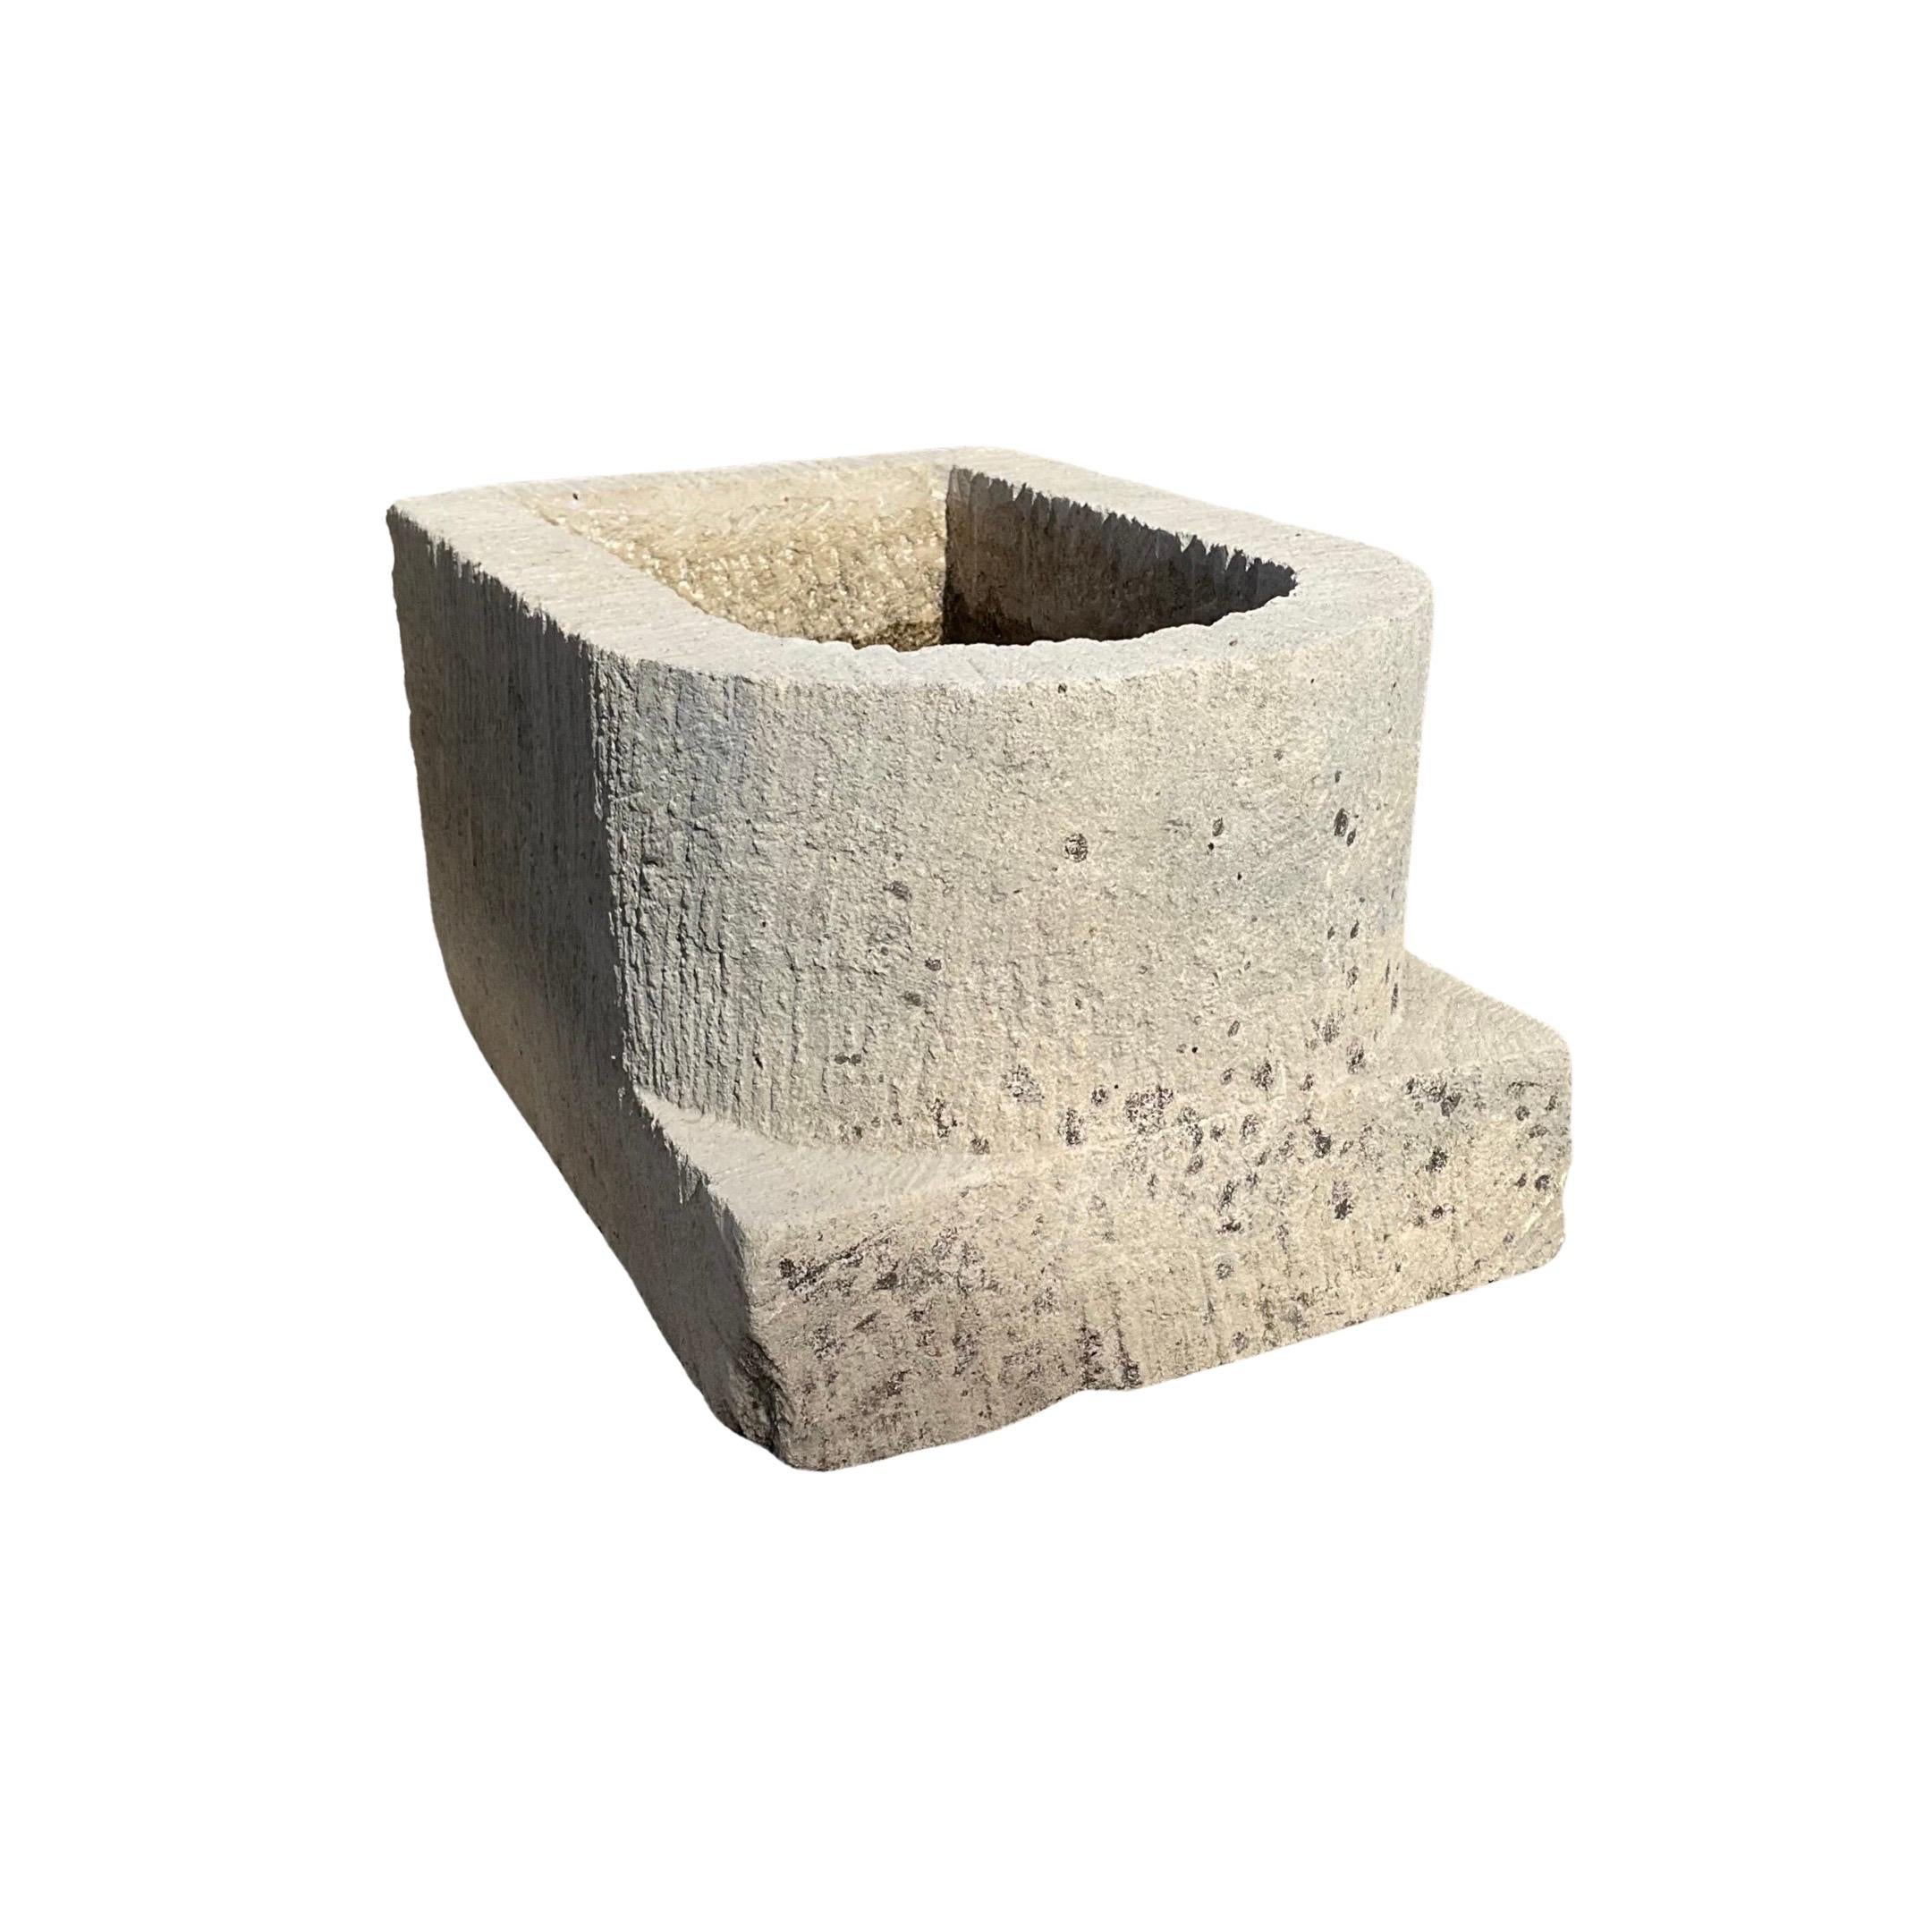 This small-sized Belgian Bluestone Planter features a Norman Window shape, crafted from authentic 18th century bluestone imported from Belgium. Enhance your garden with this unique and historic piece that adds a touch of European charm.